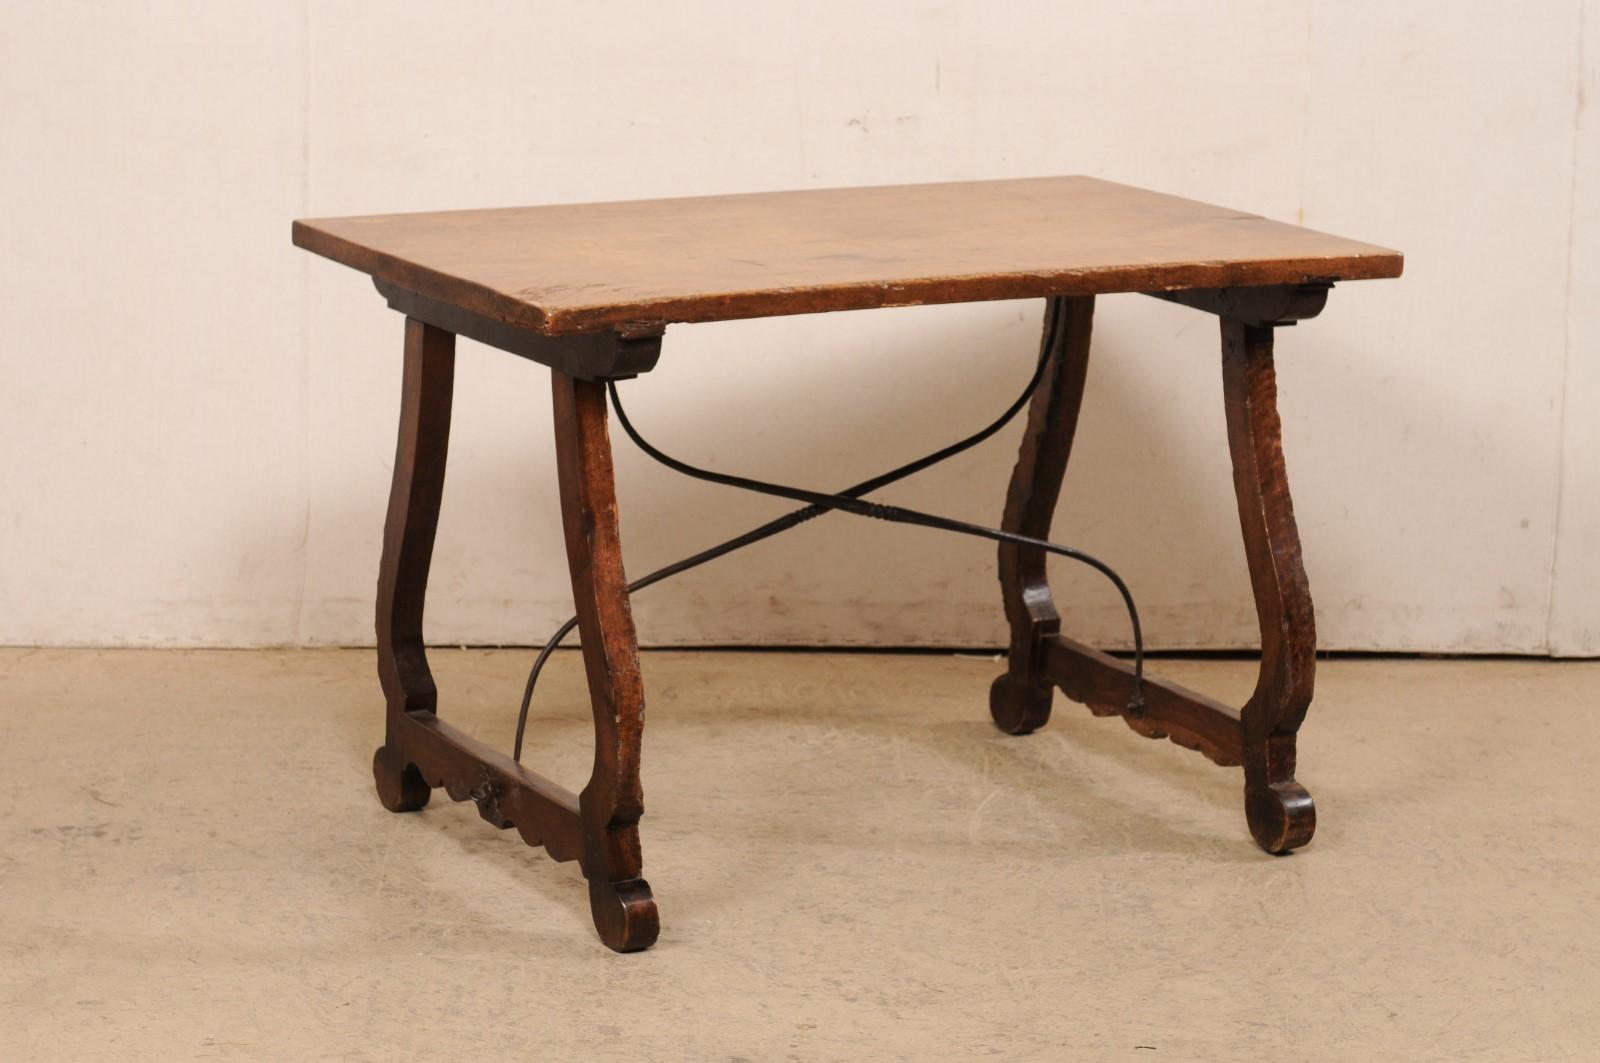 An Italian fratino desk with lyre legs and iron stretcher from the 18th century. This antique table from Italy, in typical fratino style, features a rectangular-shaped wood top raised upon a pair of lyre carved trestle legs, which are braced at the